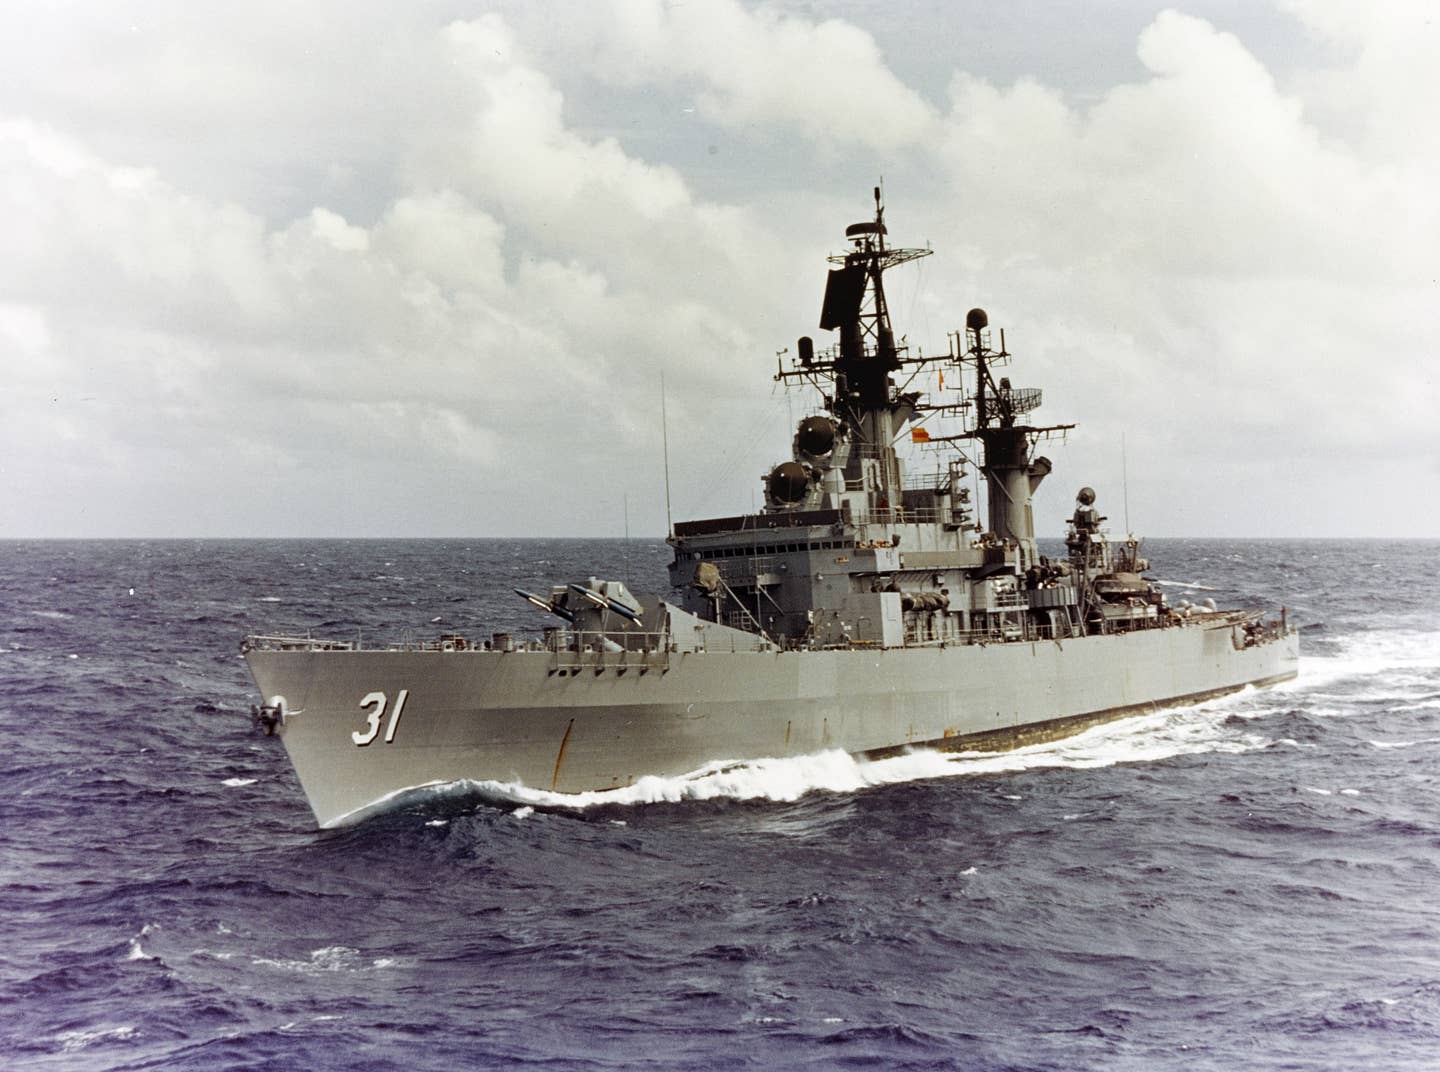 The U.S. Navy destroyer-leader (later classified as a guided-missile cruiser) USS <em>Sterett</em> underway in the Pacific in January 1972. Note the forward twin-arm launcher for Terrier missiles. Credit: U.S. Navy